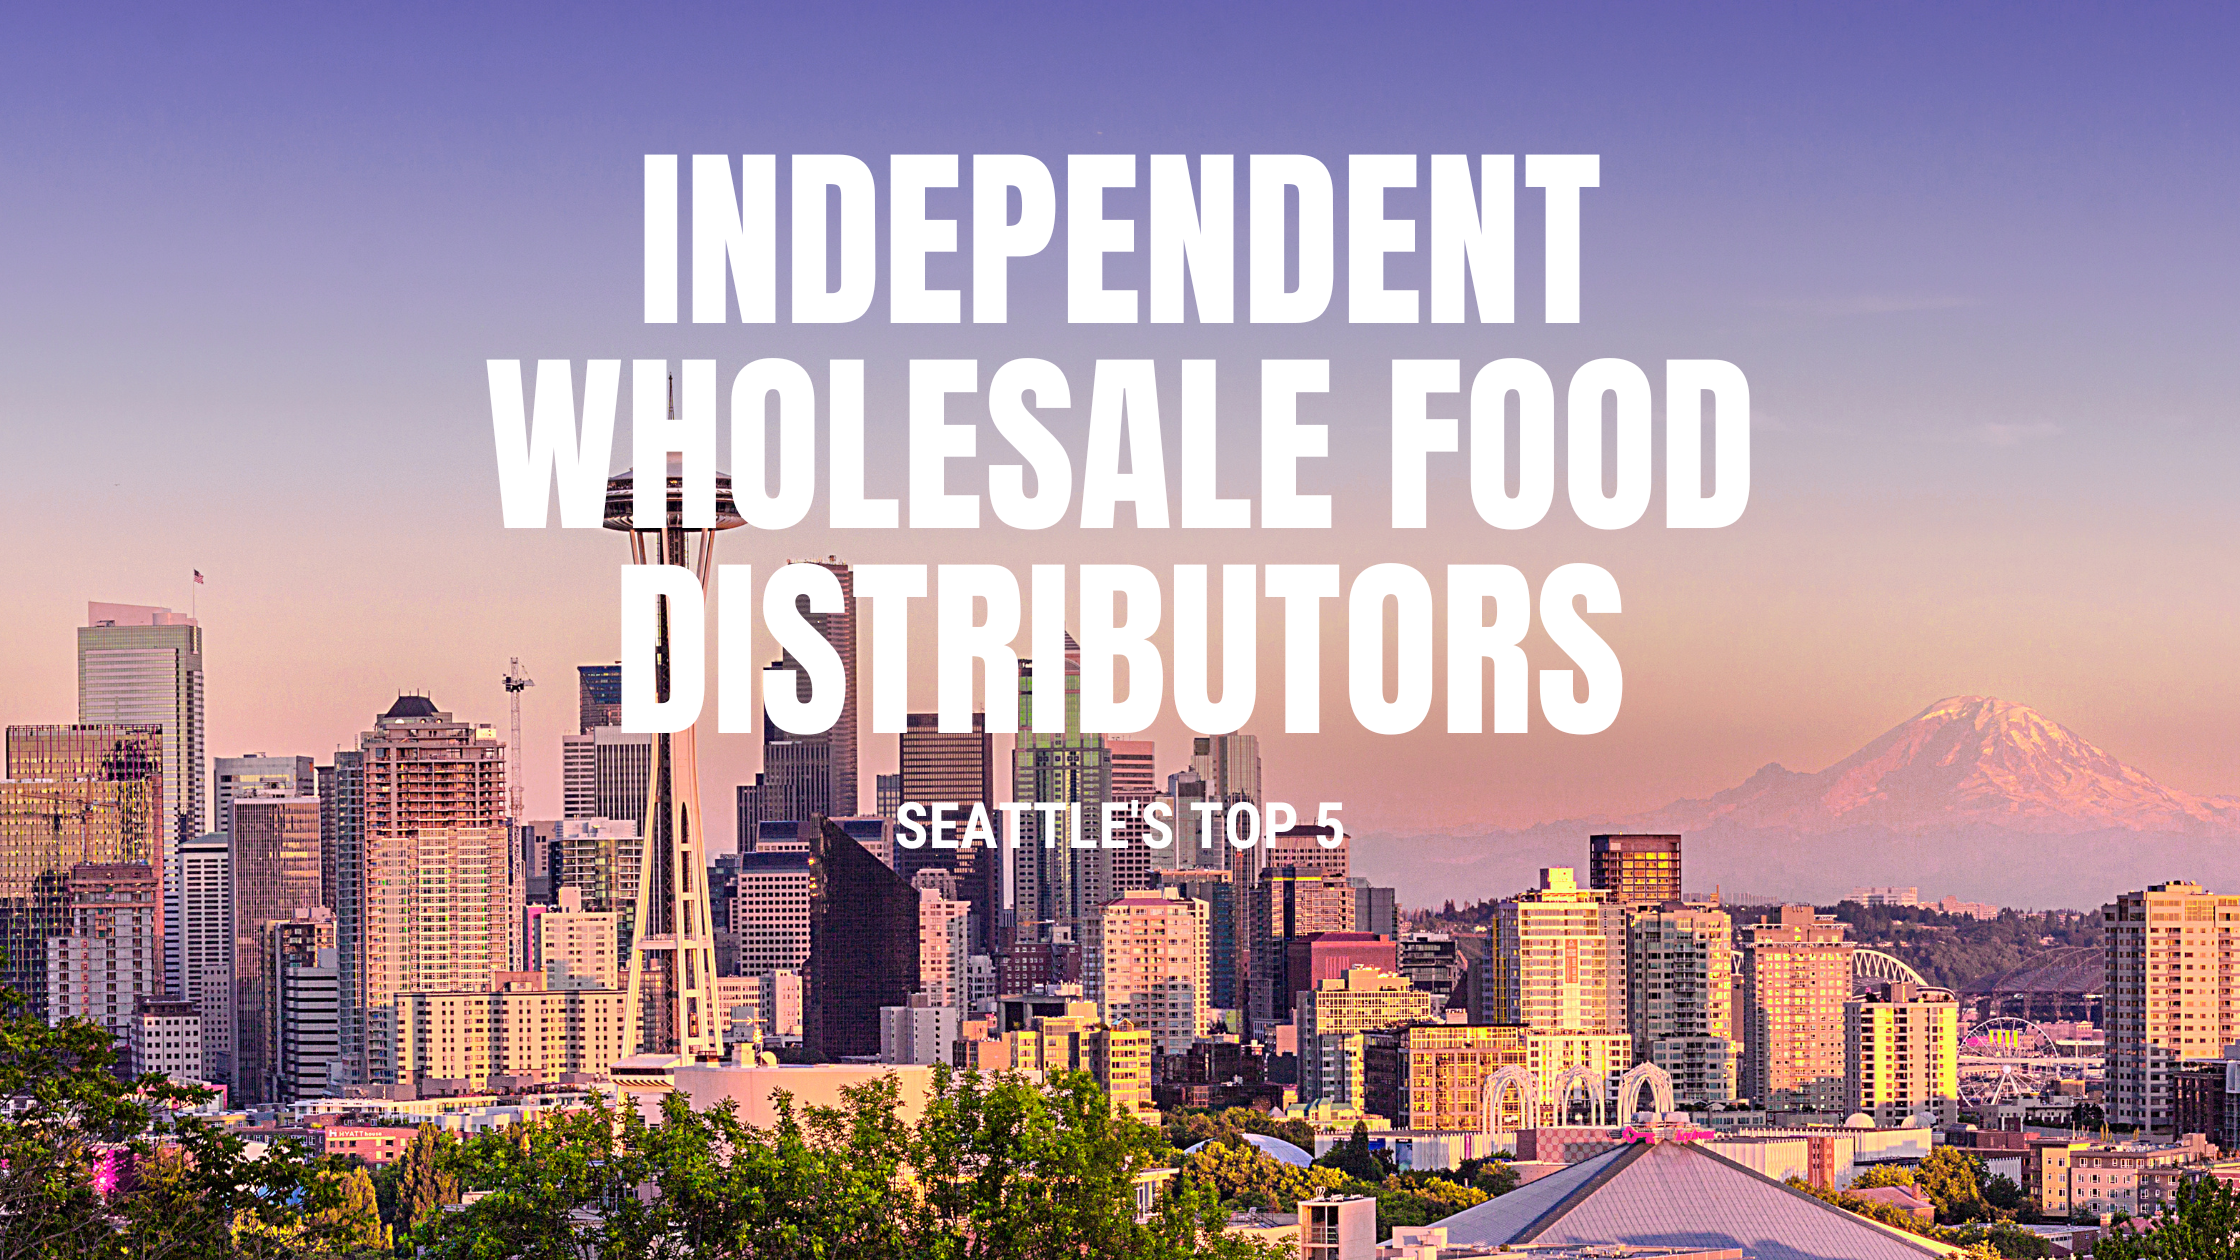 Independent Wholesale Food Distributors in Seattle [5 Examples]